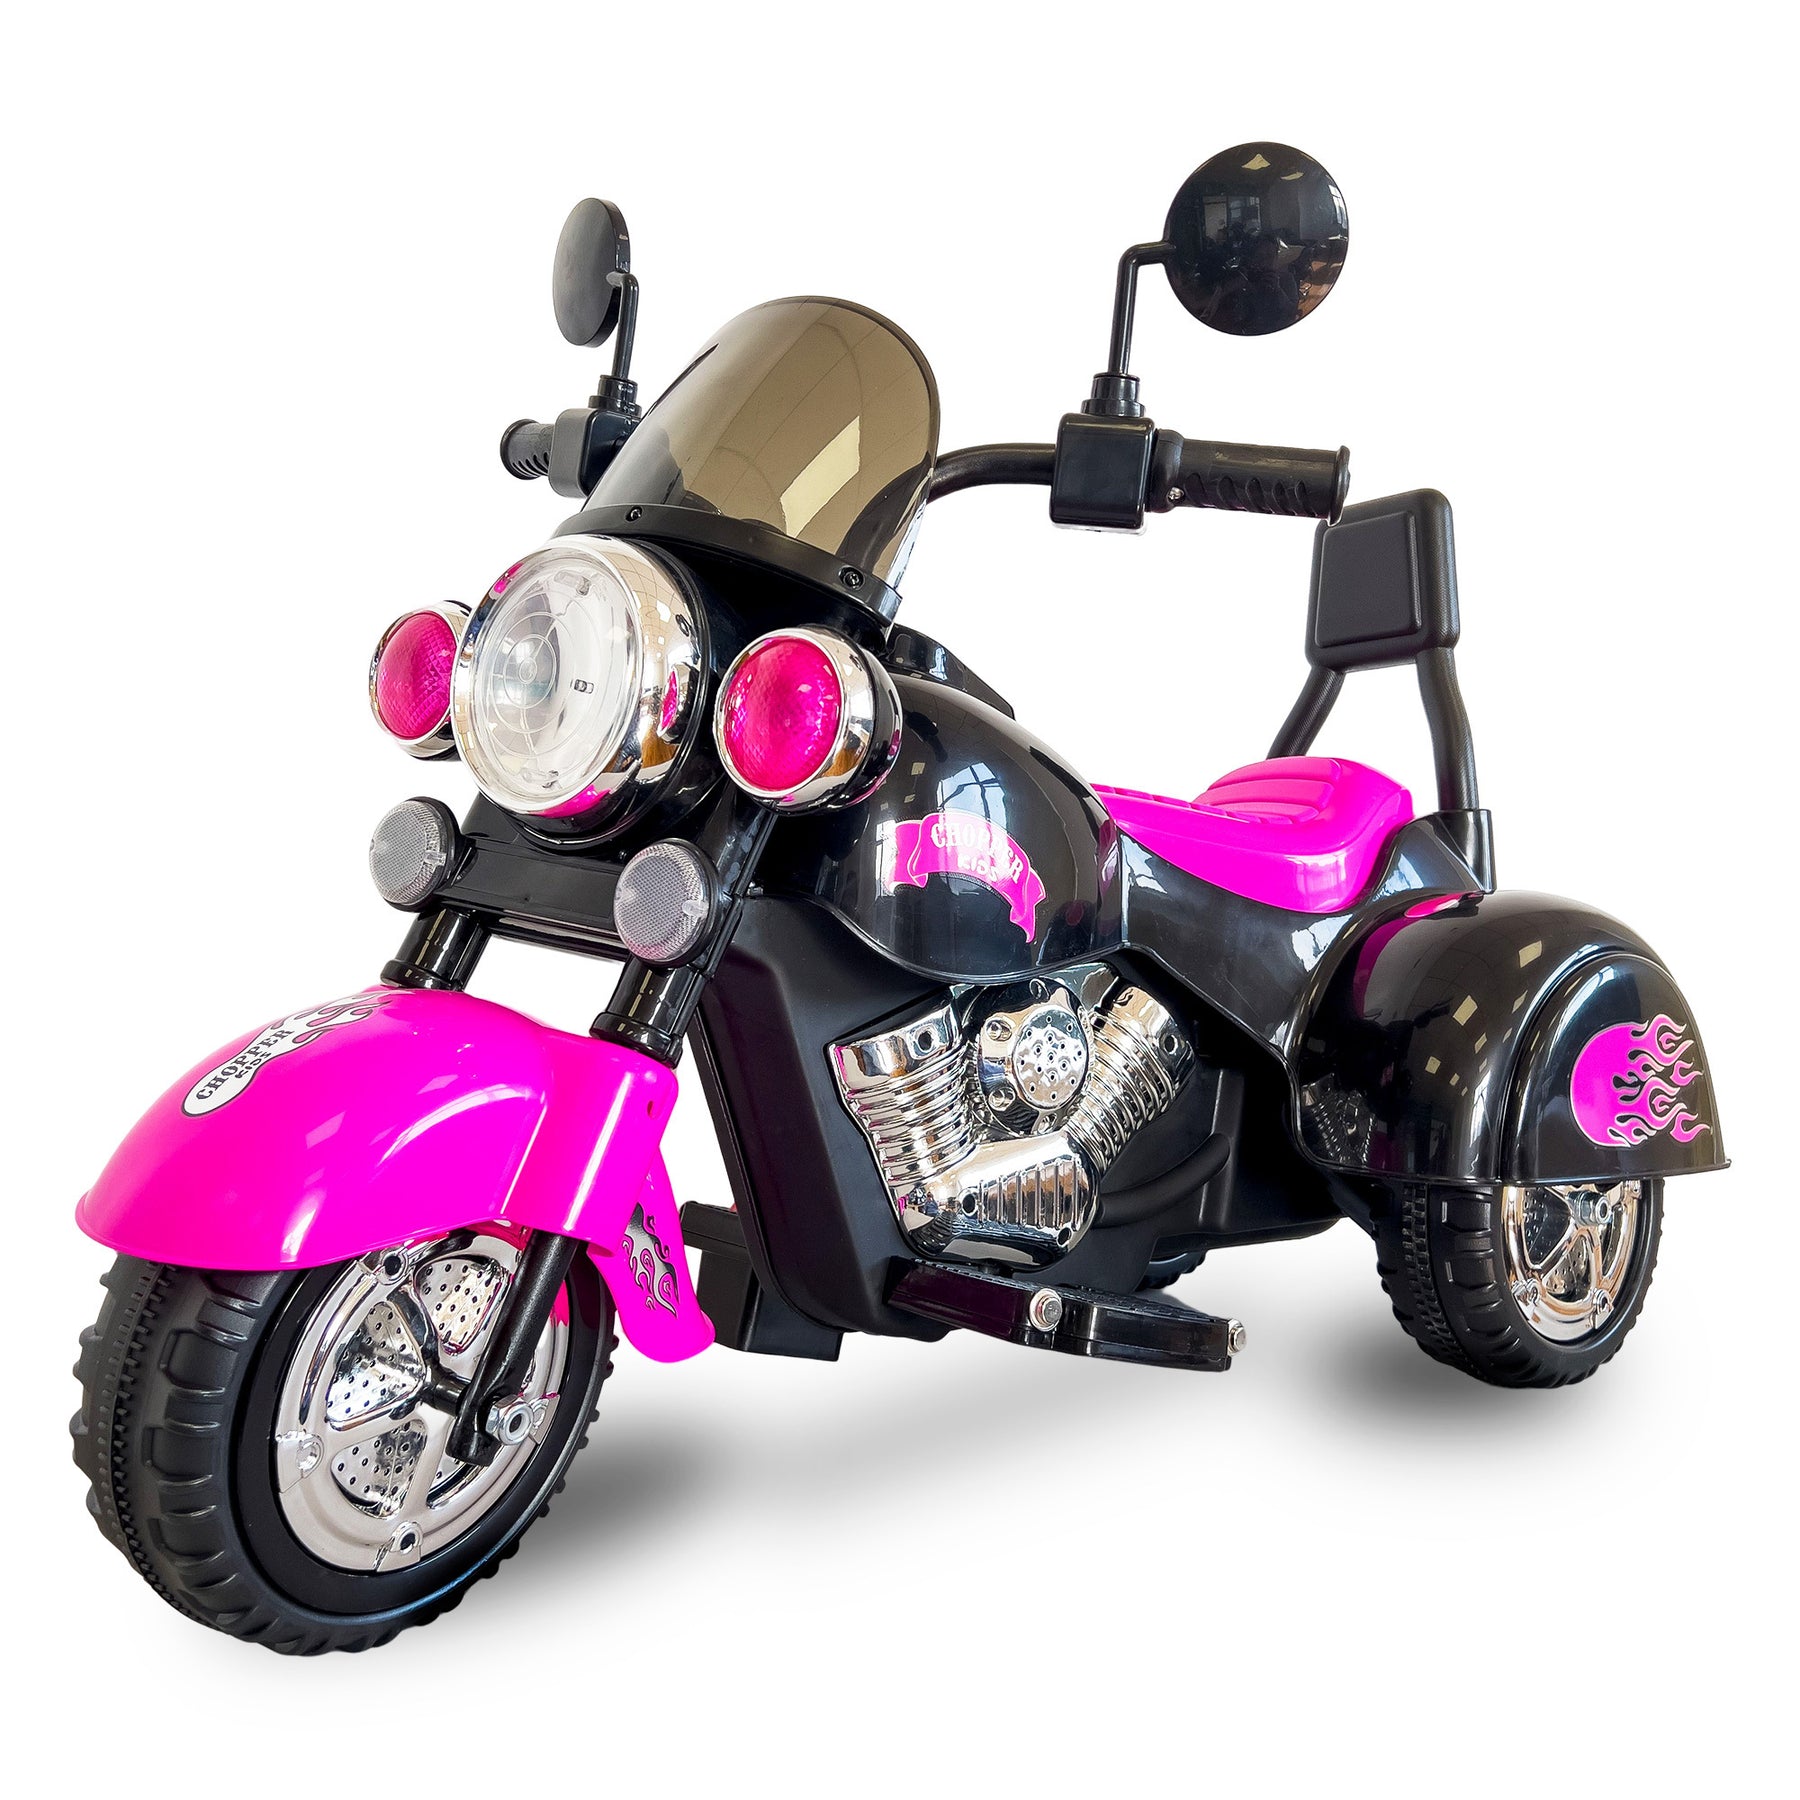 Kids Ride On Motorcycle Toy, 3-Wheel Chopper Motorbike with LED Colorful Headlights Horn, Pink 6V Battery Powered Riding on Electric Harley Motorcycle for Boys Girls - Tonkn